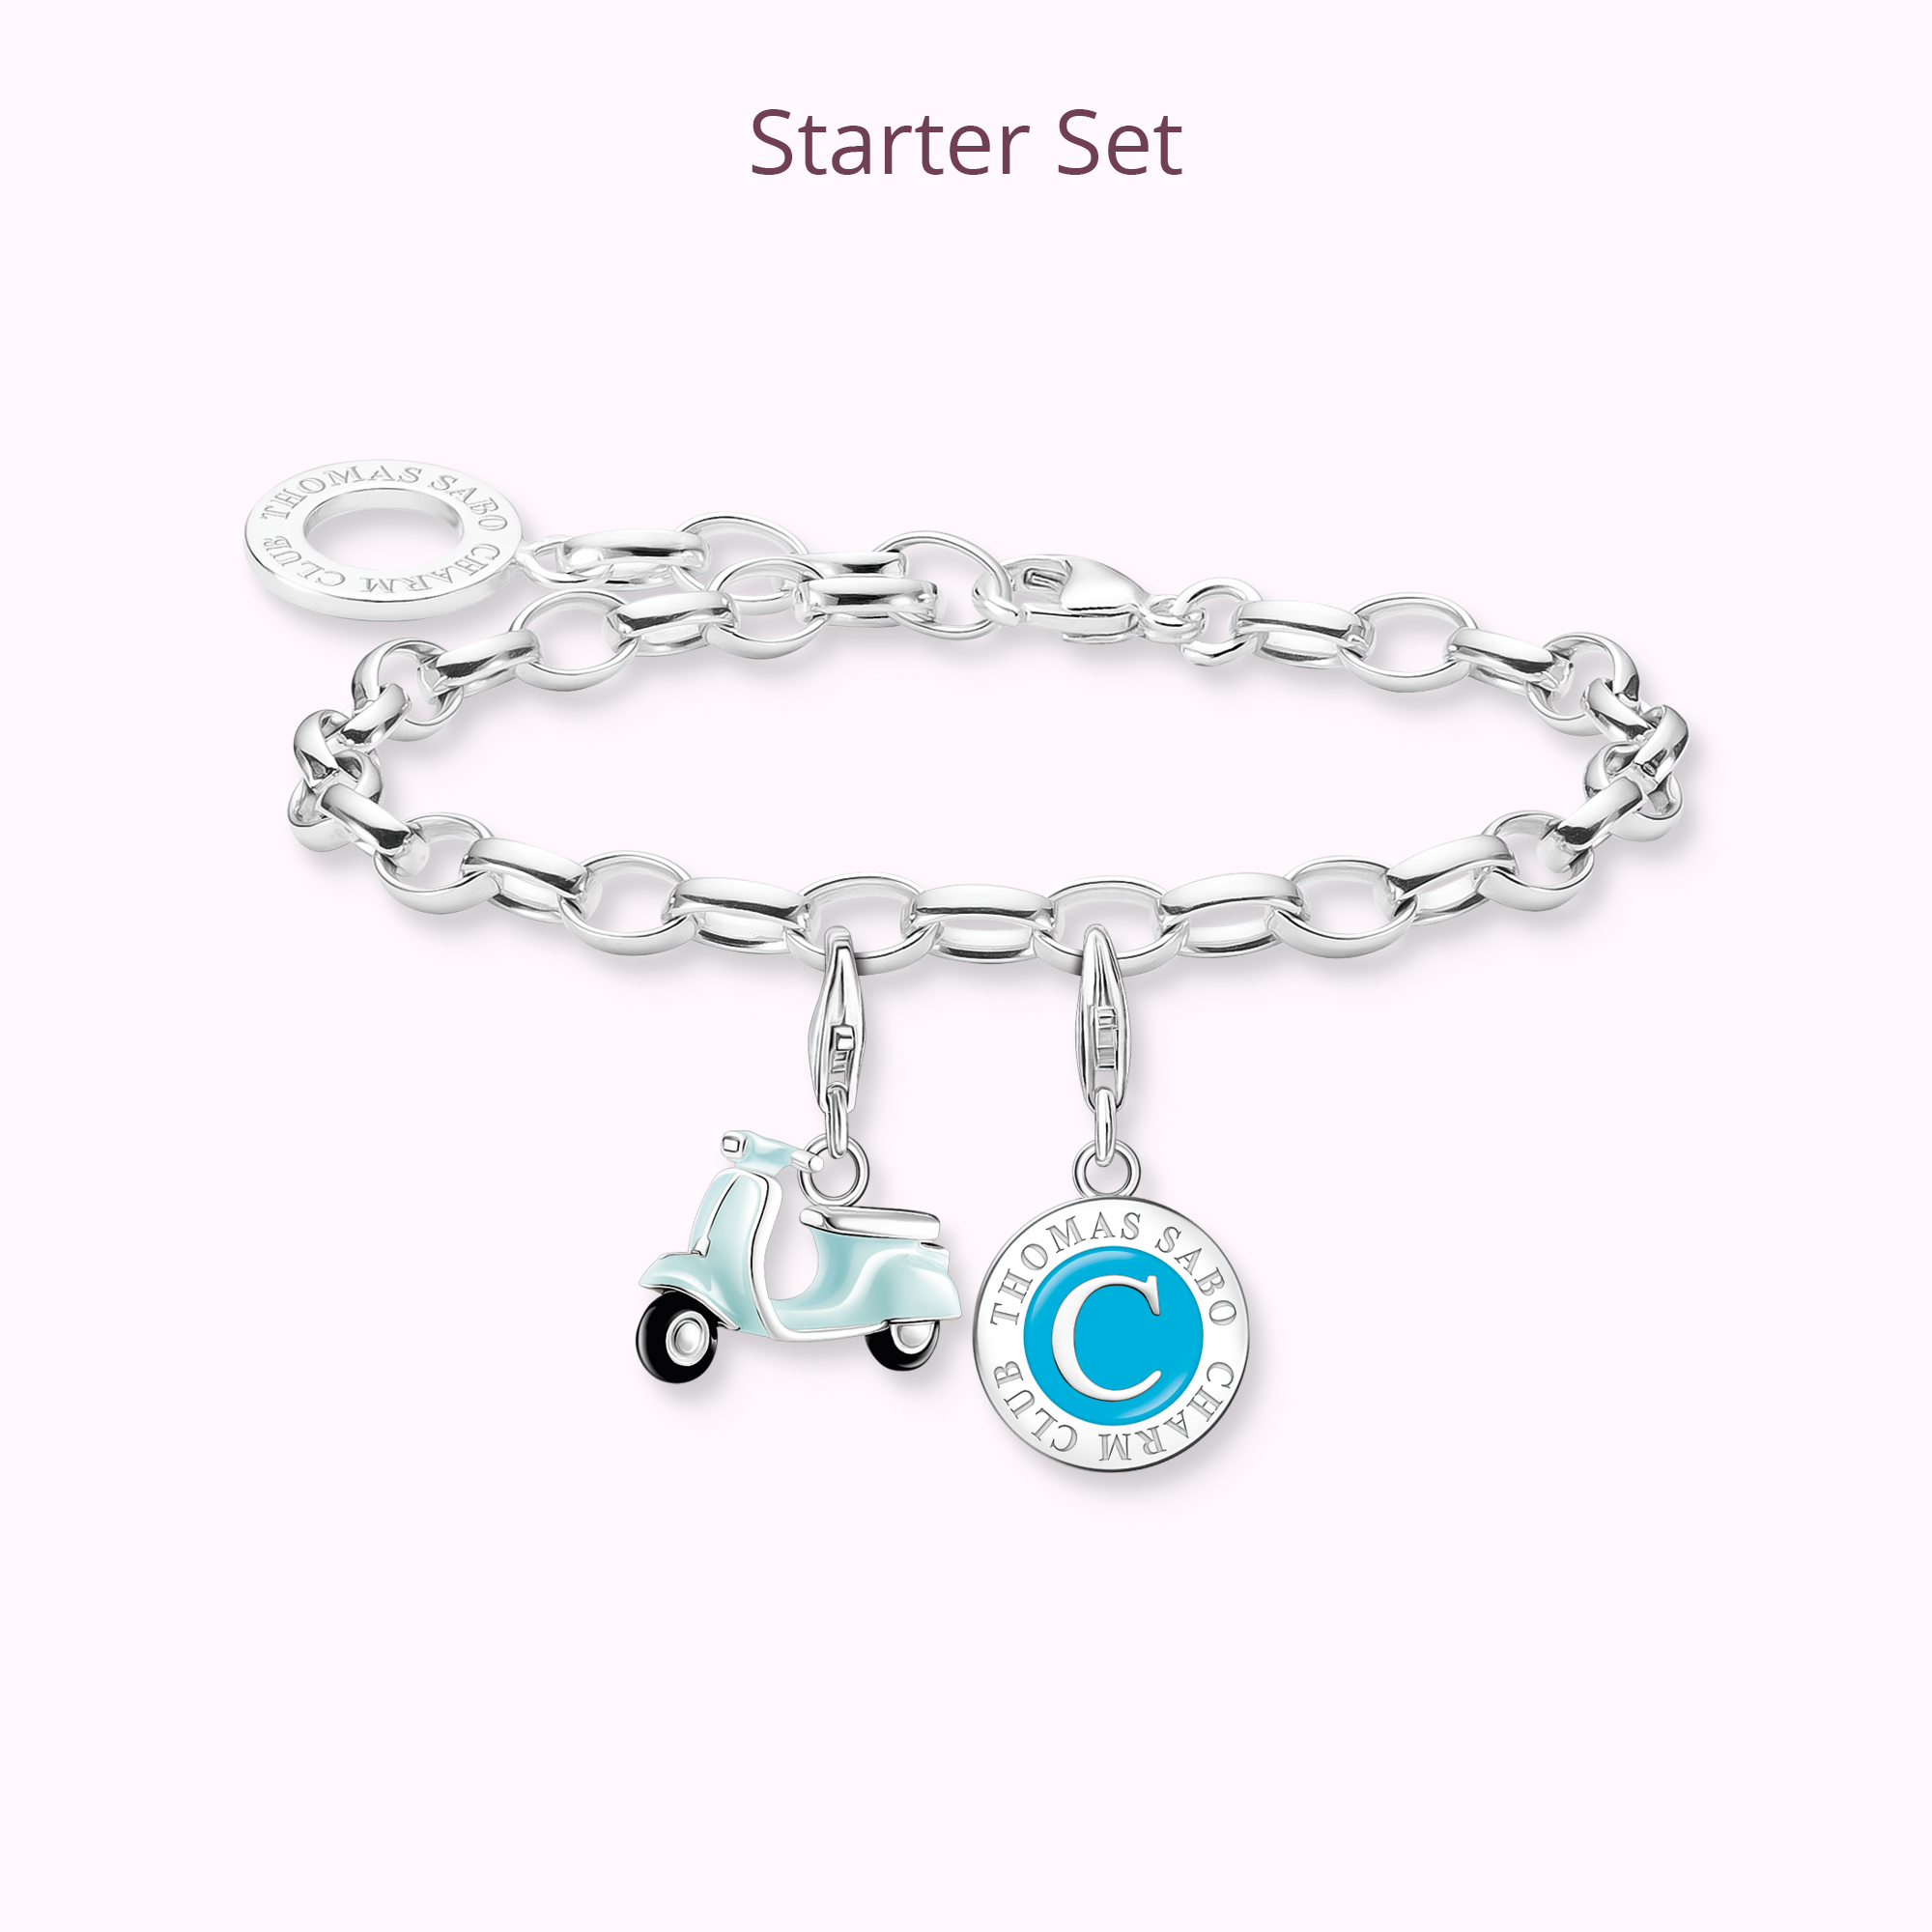 Traditional charms and charm bracelet for girls and women in sterling silver  or solid gold